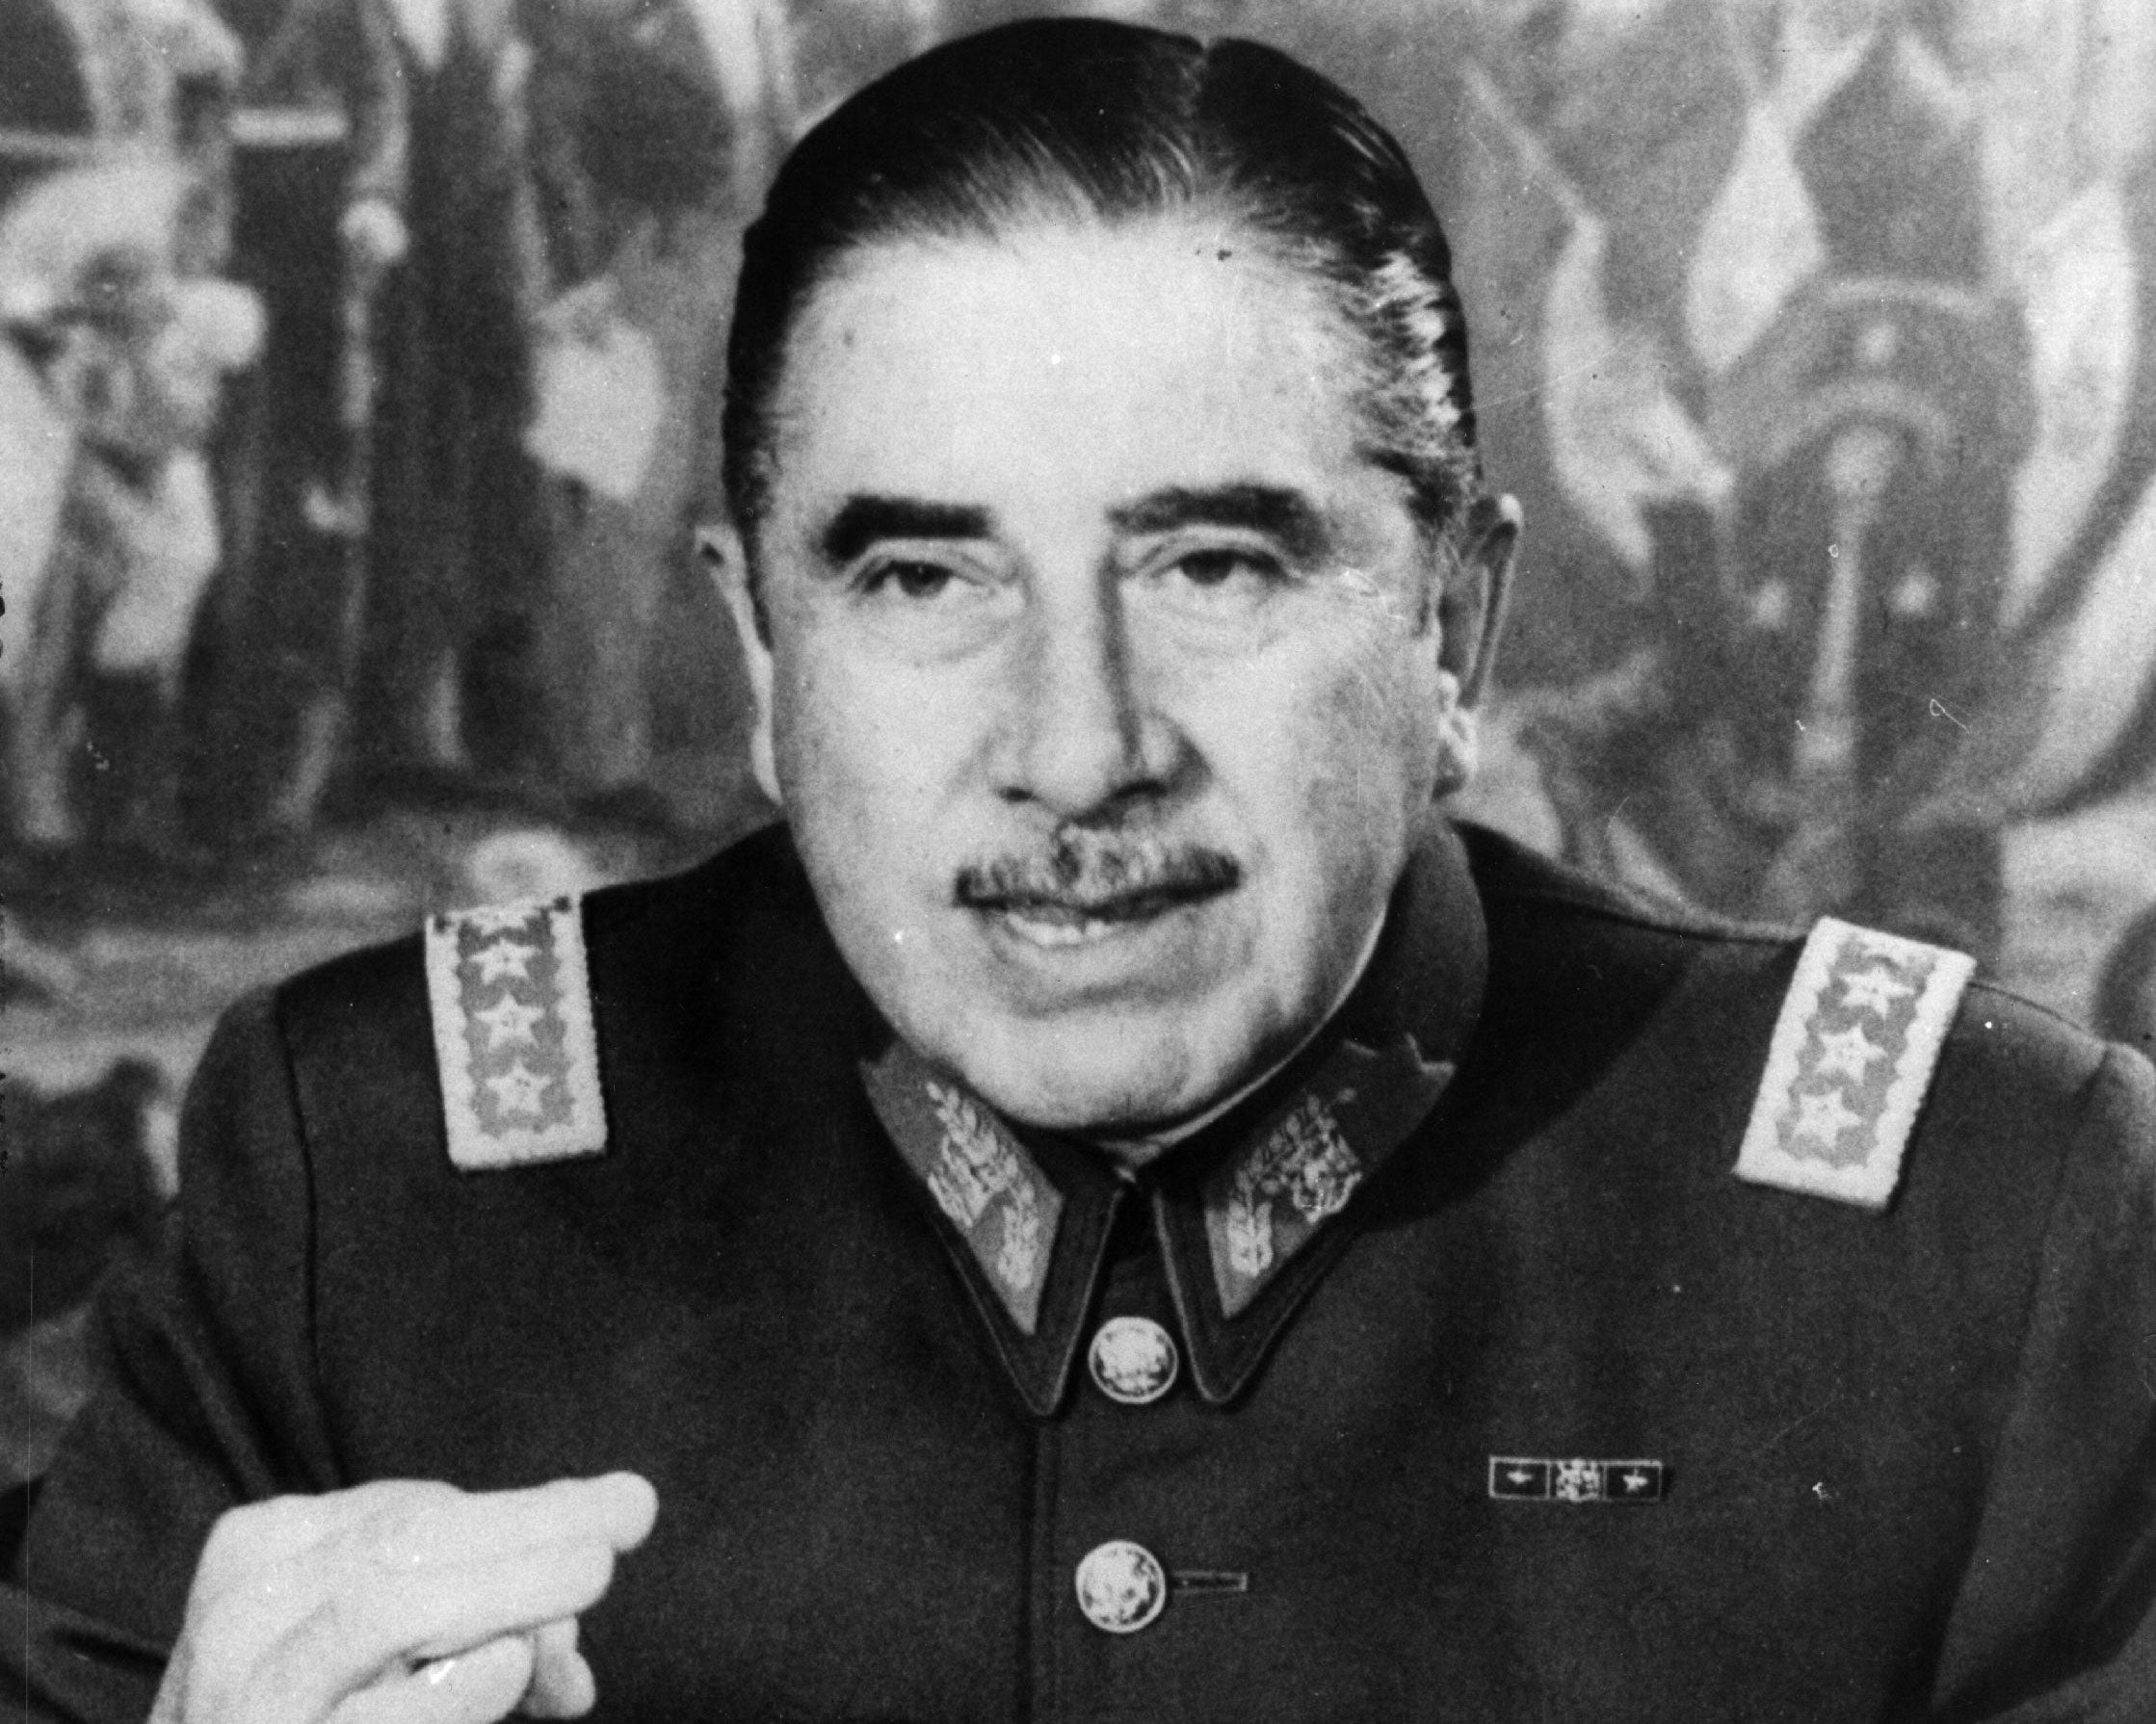 Former dictator of Chile, Augusto Pinochet